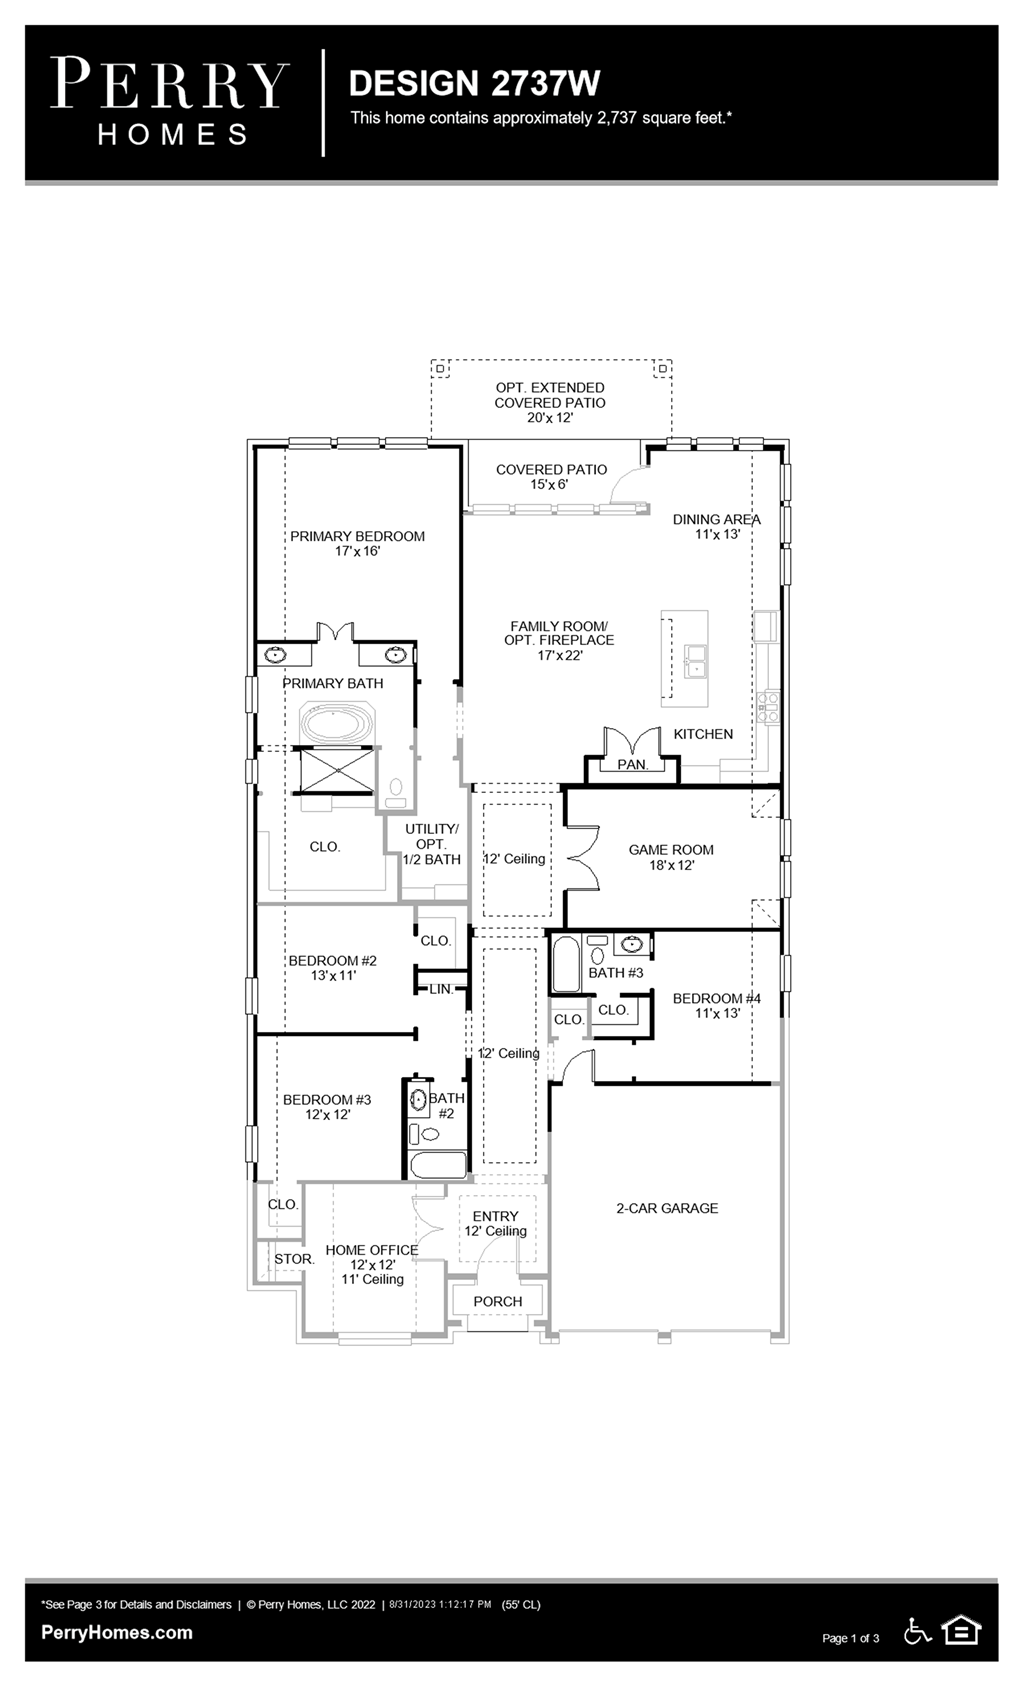 Available To Build In Harmony 55 Design 2737w Perry Homes